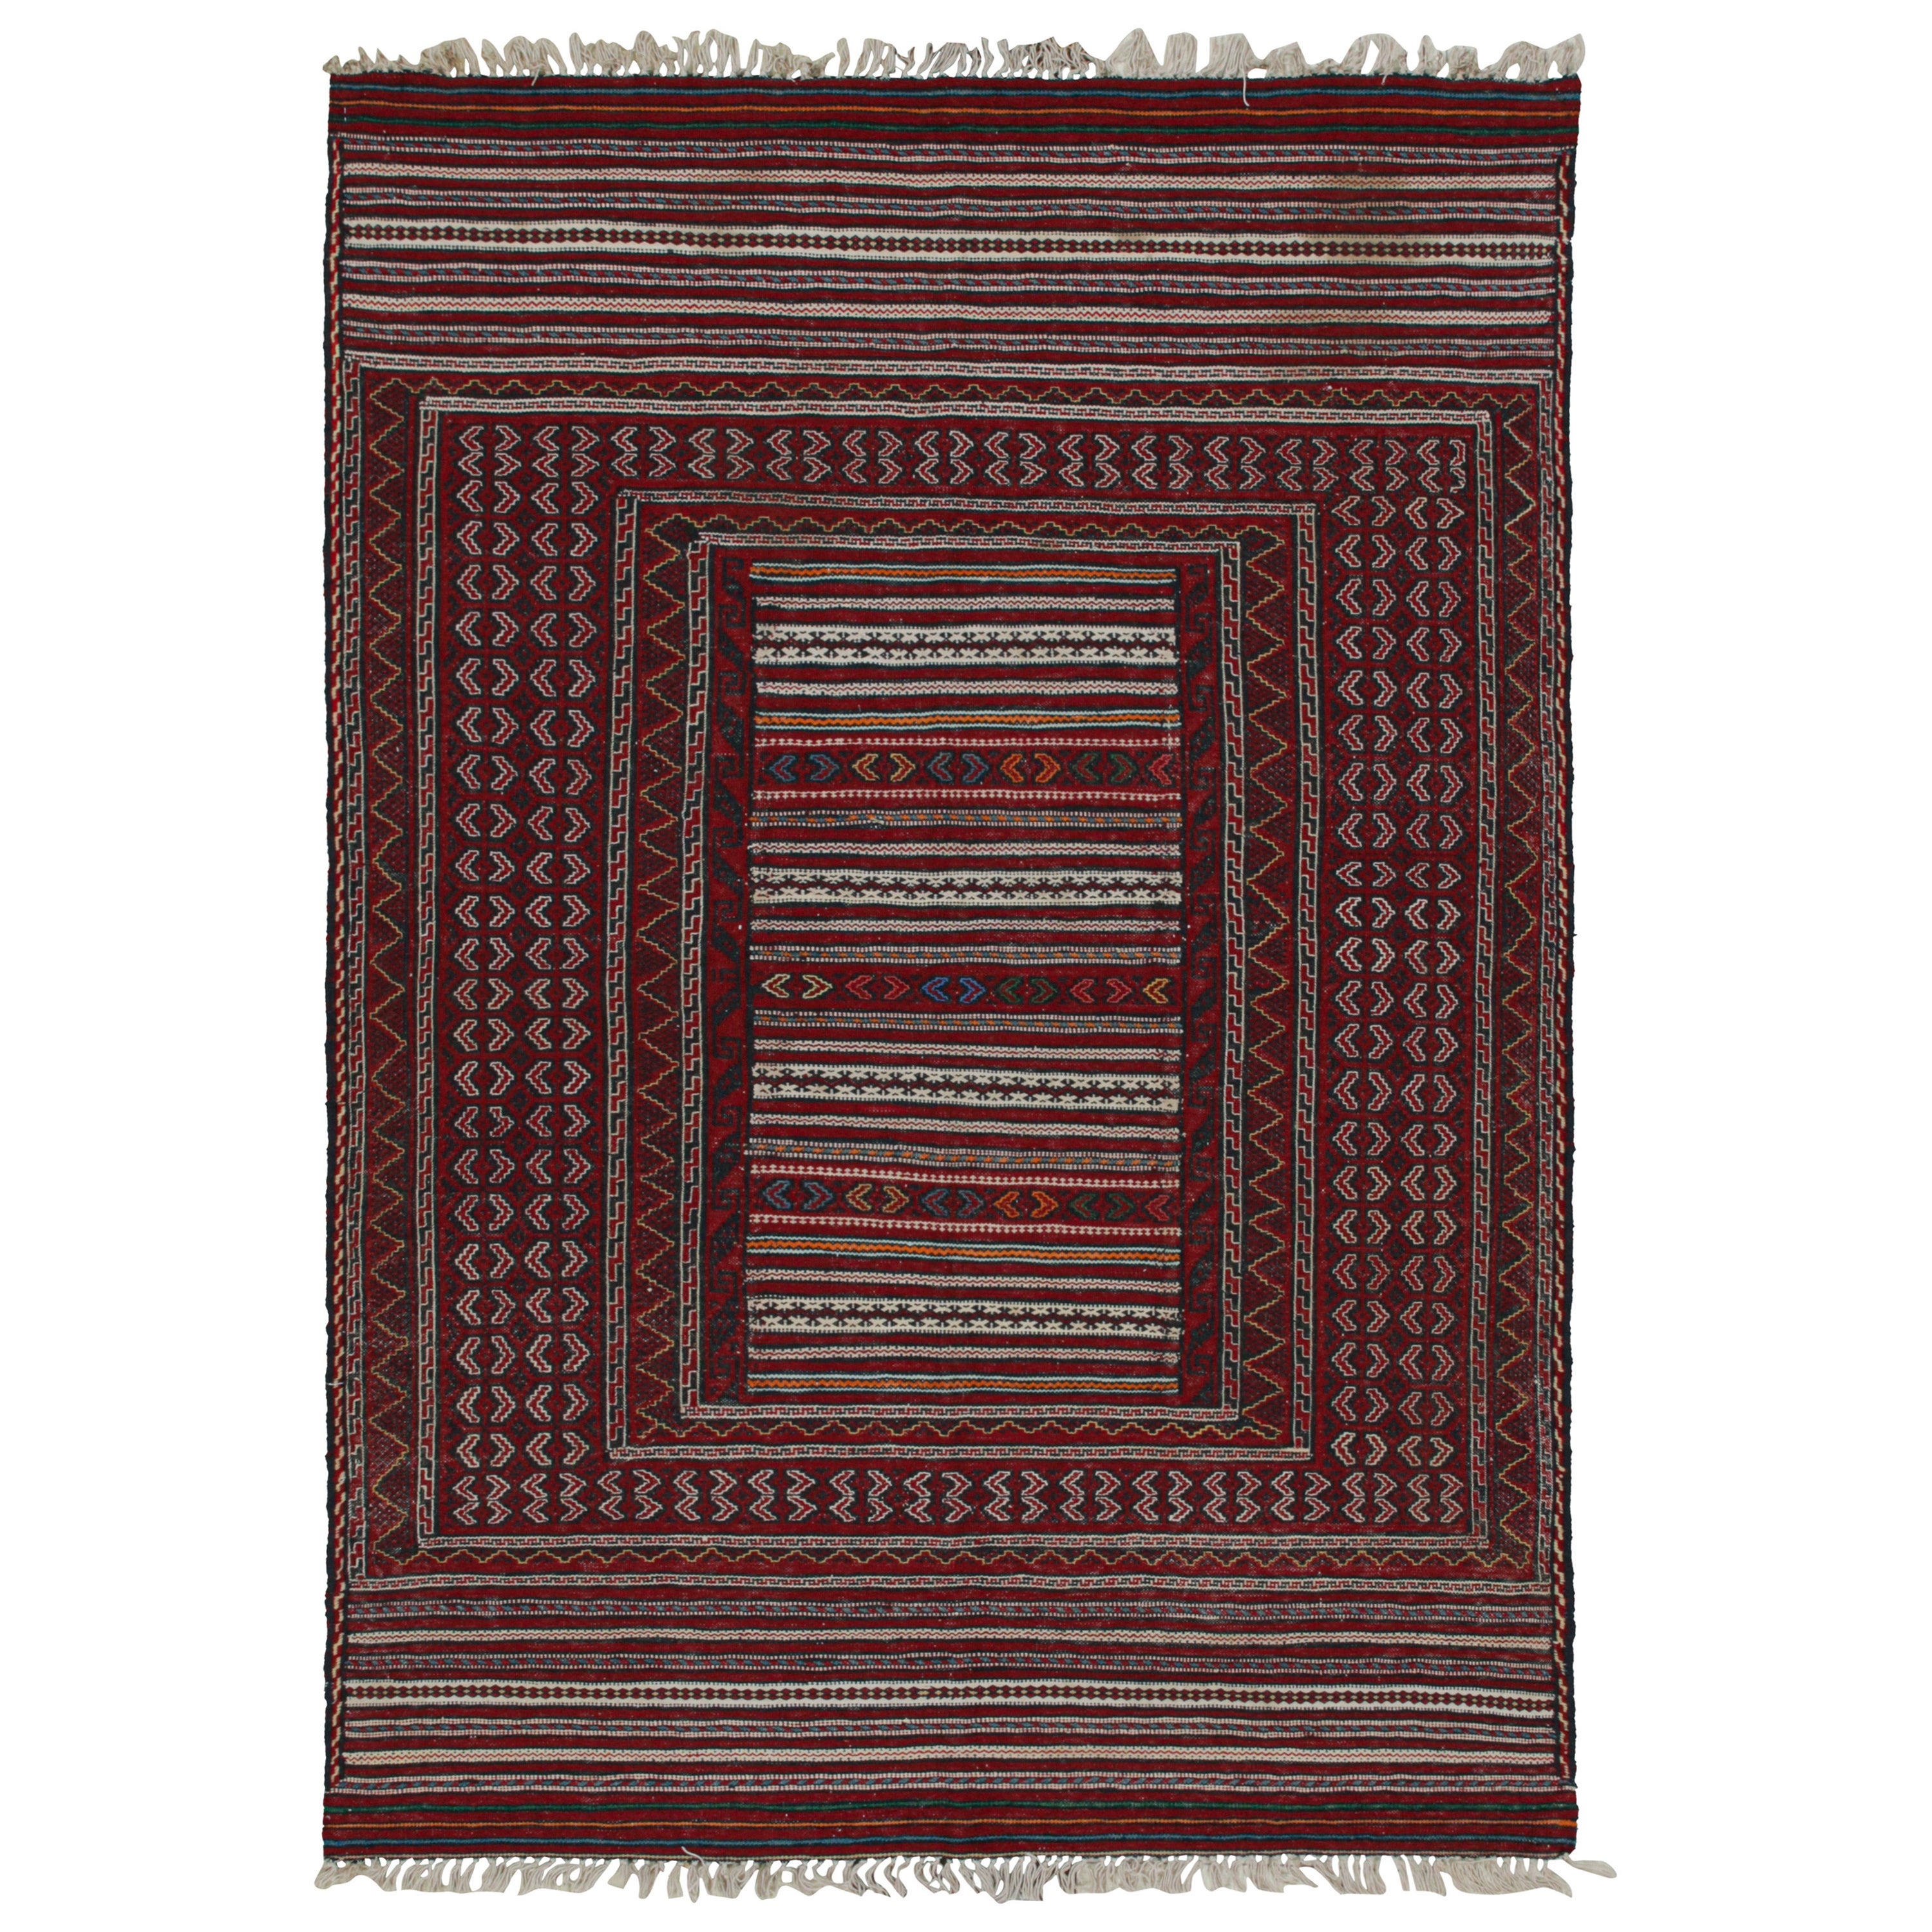 Vintage Baluch Tribal Kilim in Red with Geometric Patterns, from Rug & Kilim